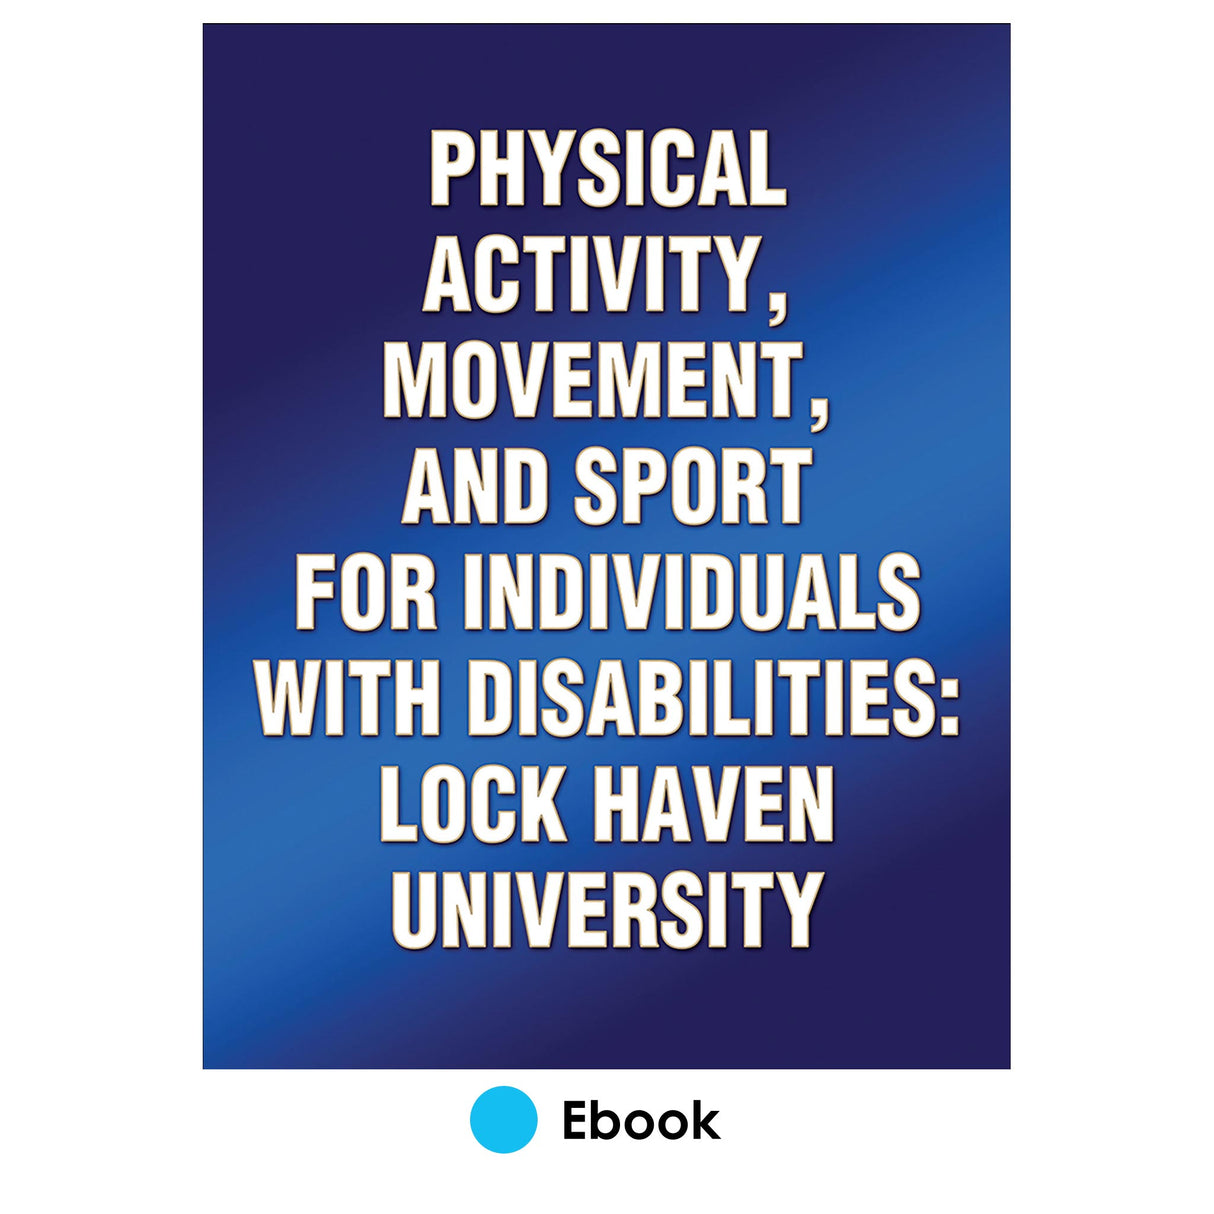 Physical Activity, Movement, and Sport for Individuals with Disabilities: Lock Haven University